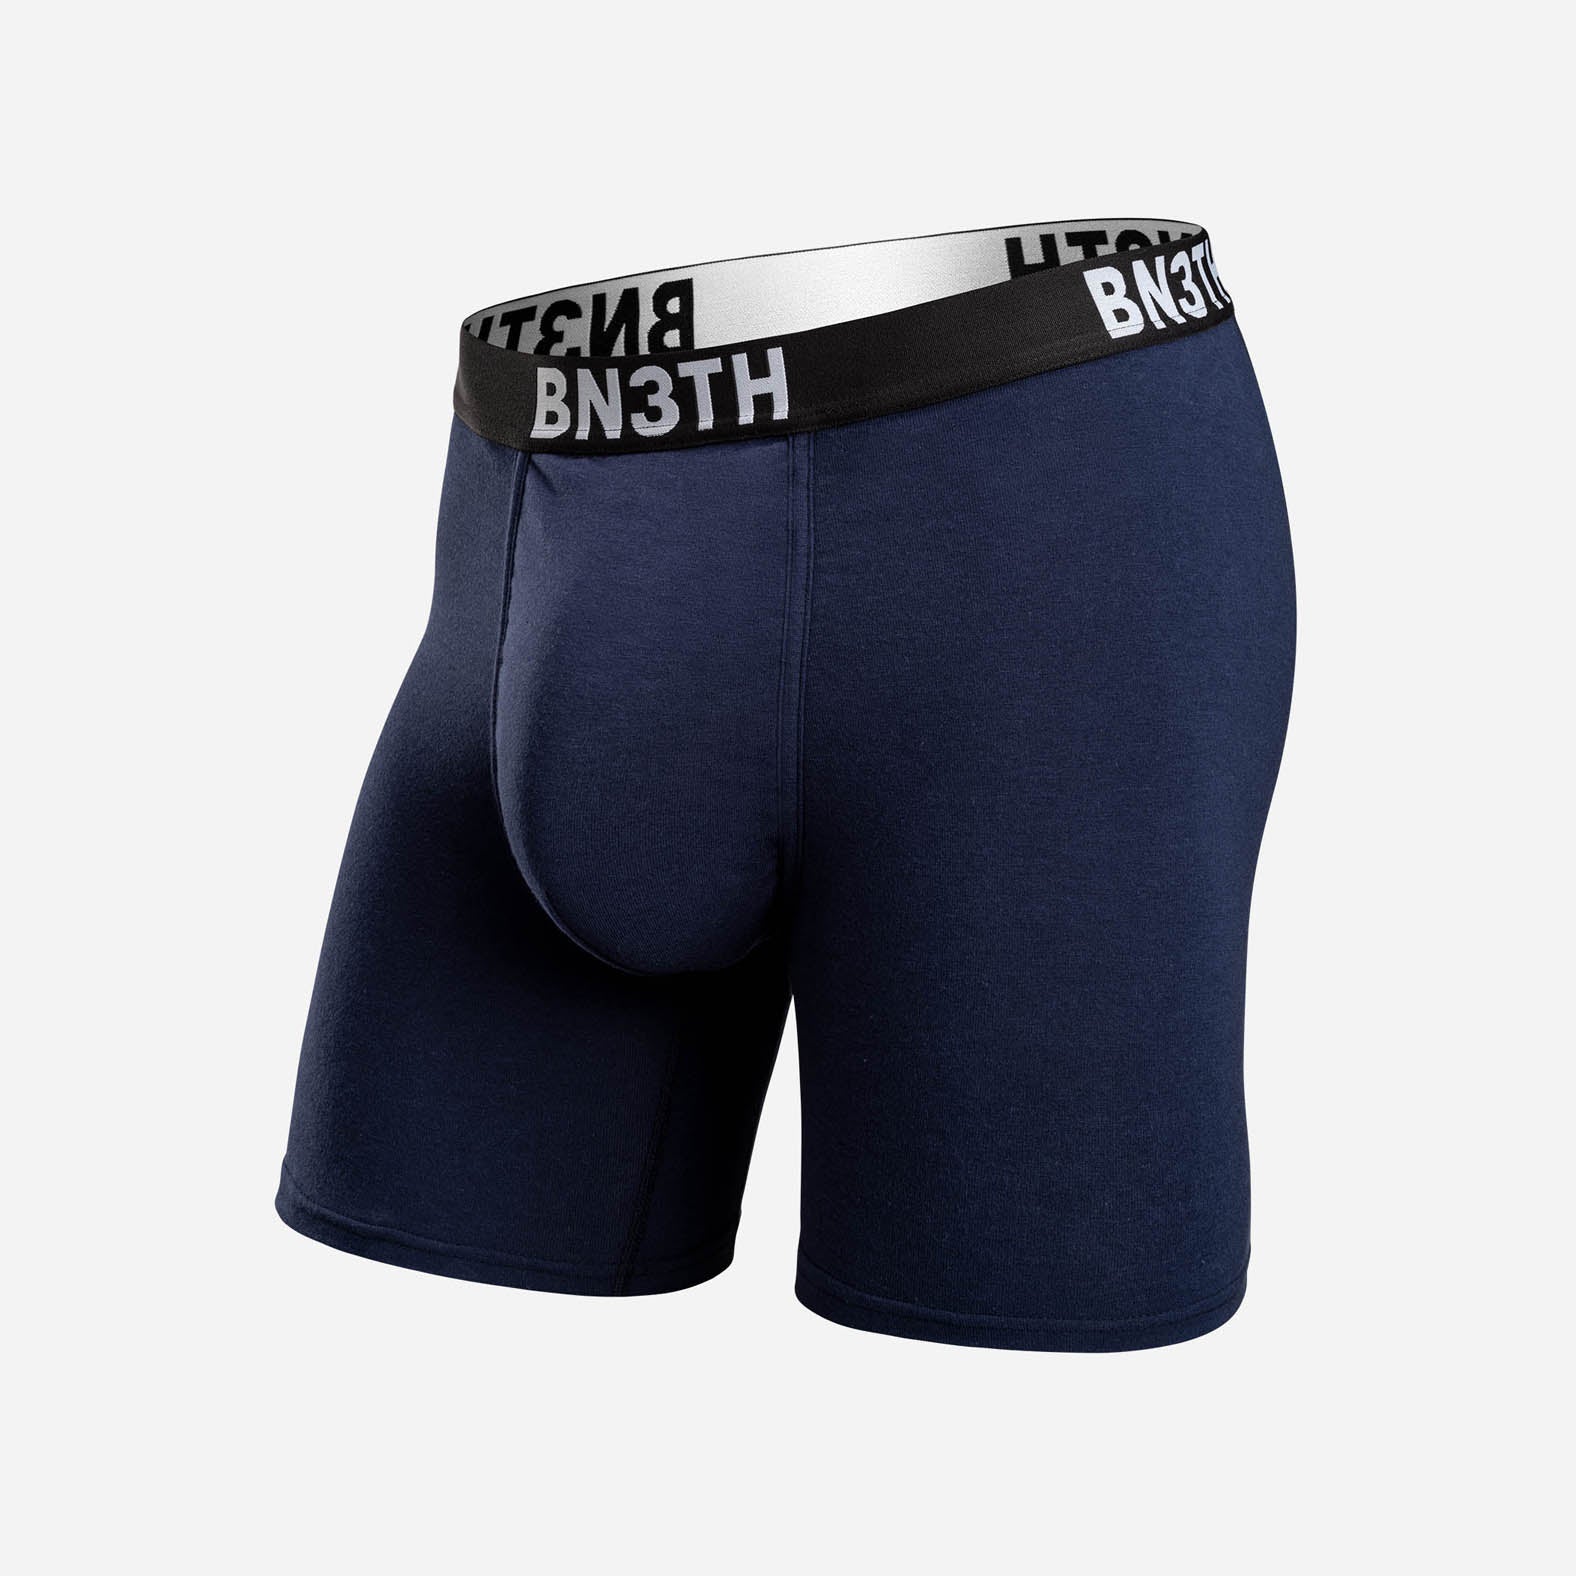 Bn3th Expands From Underwear to Bike Shorts